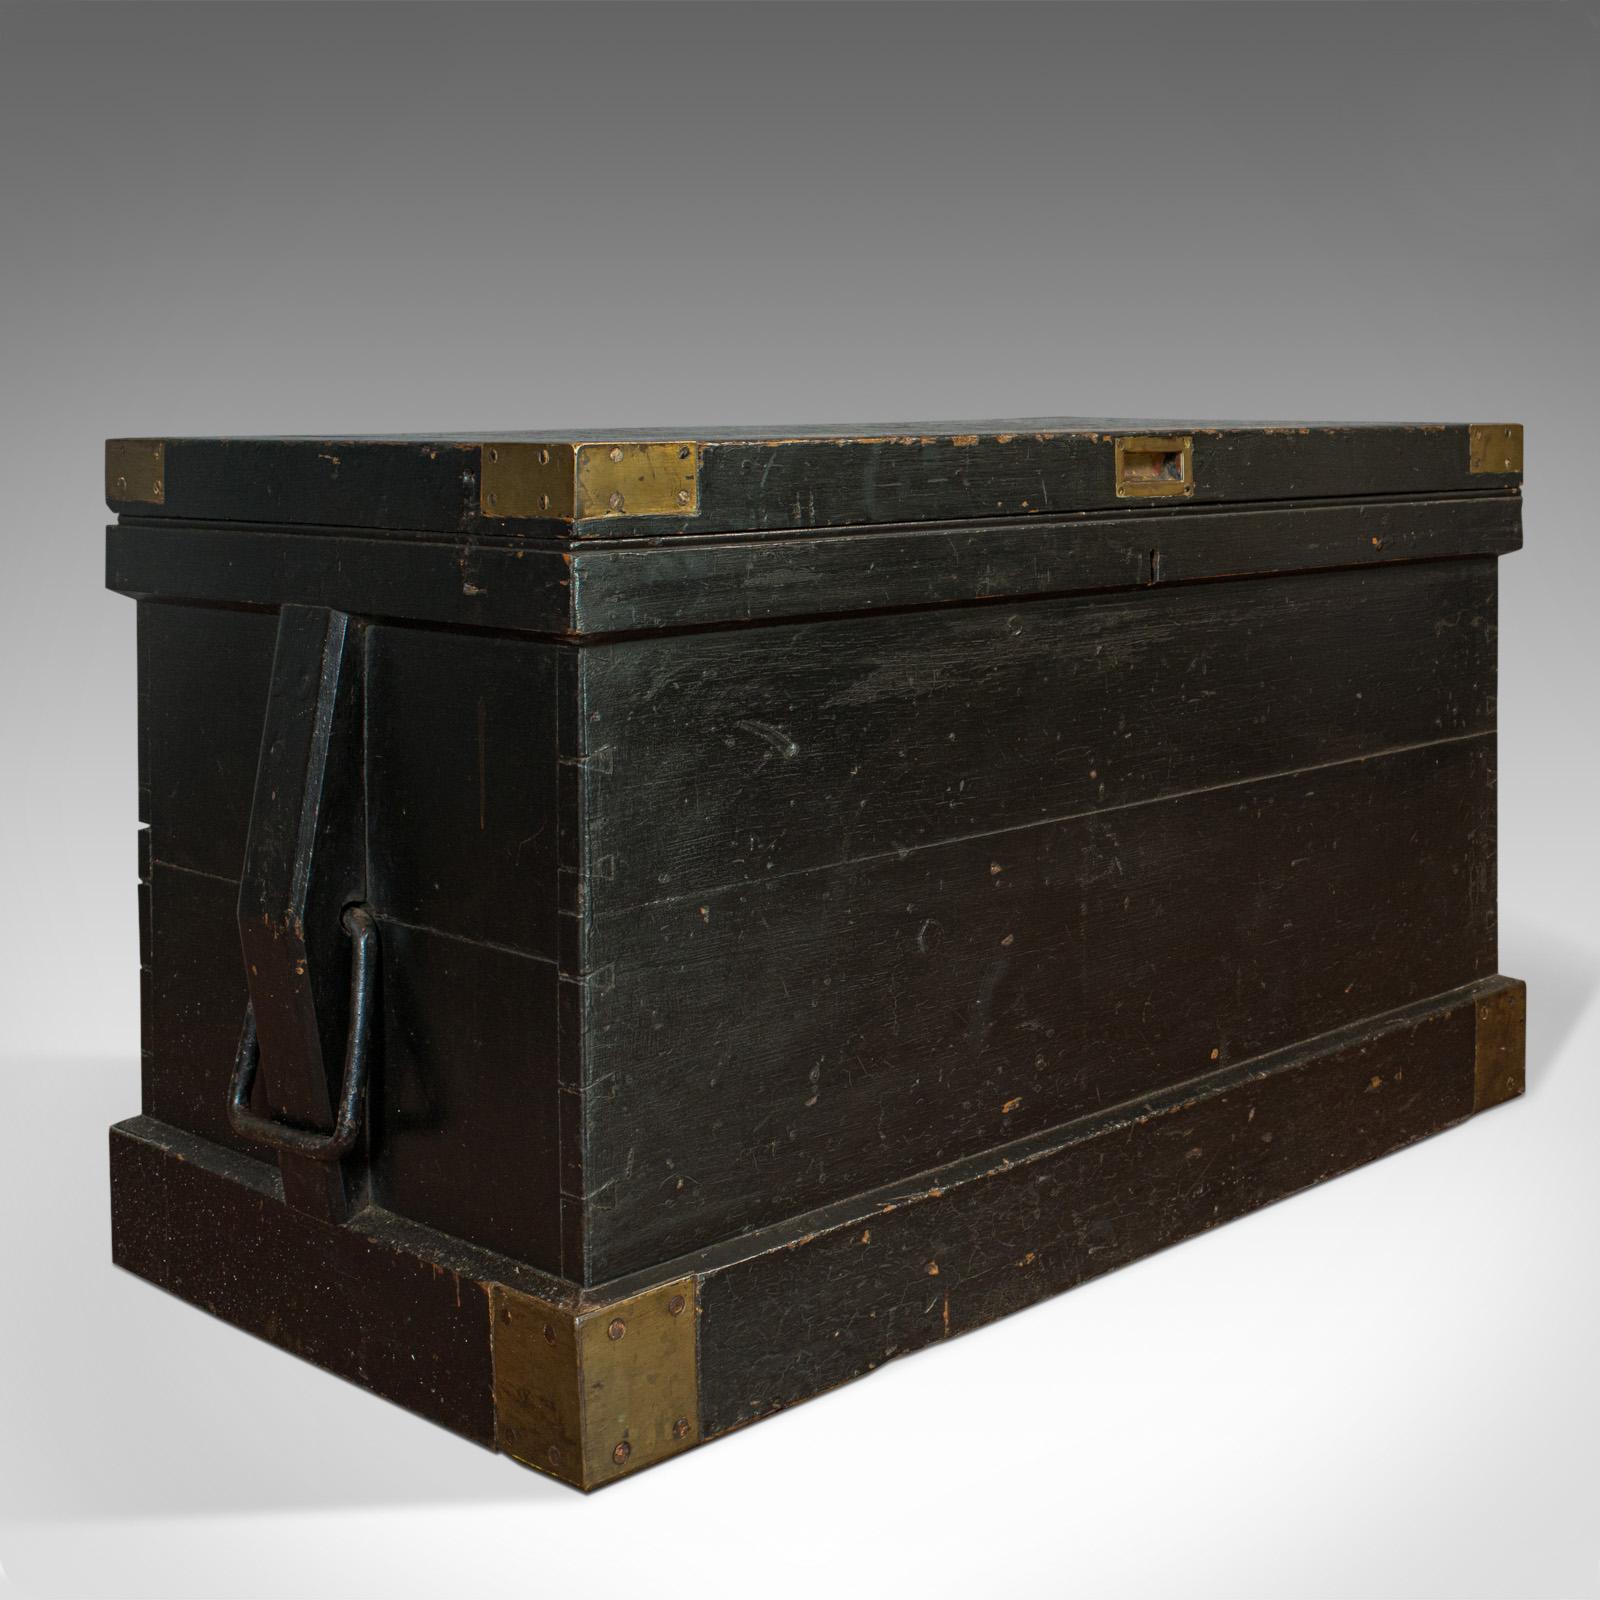 This is an antique master shipwright's chest. An English, ebonized mahogany tool trunk with ornate interior, dating to the Victorian period, circa 1880.

Wonderful craftsman's piece with hidden depths
Displays a desirable aged patina
Ebonized